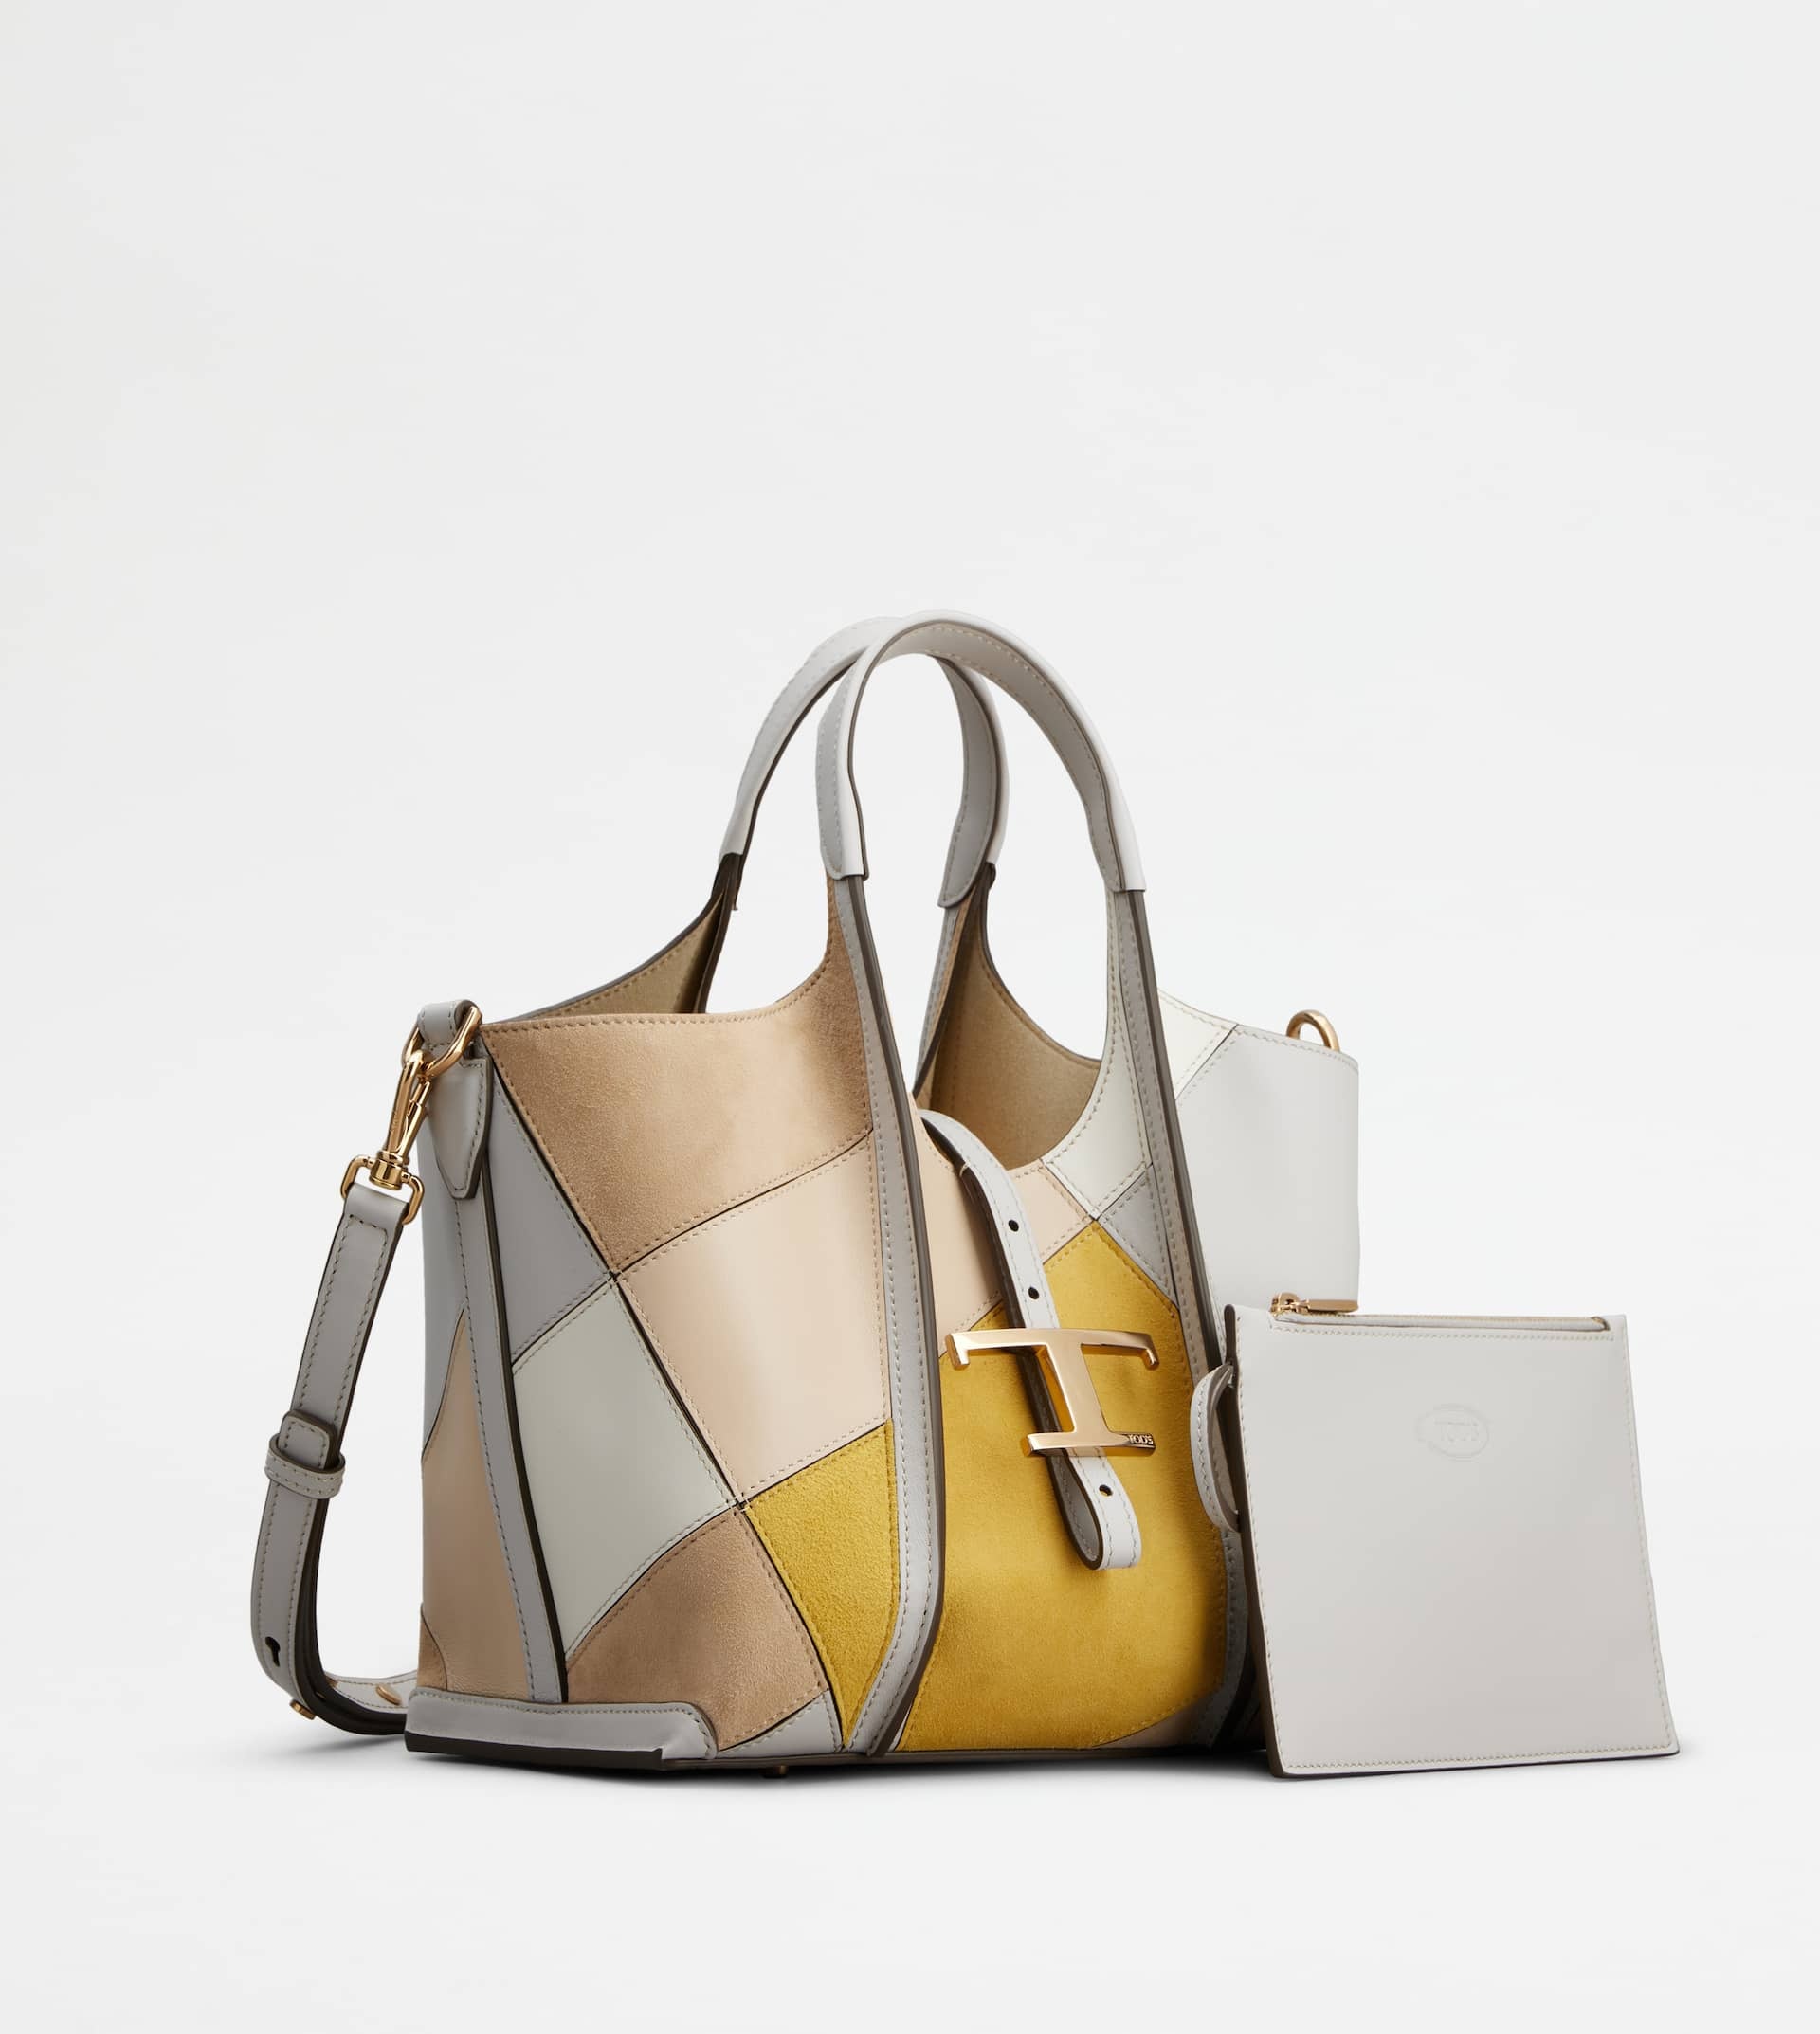 T TIMELESS SHOPPING BAG IN LEATHER MINI - BEIGE, YELLOW, GREY - 2